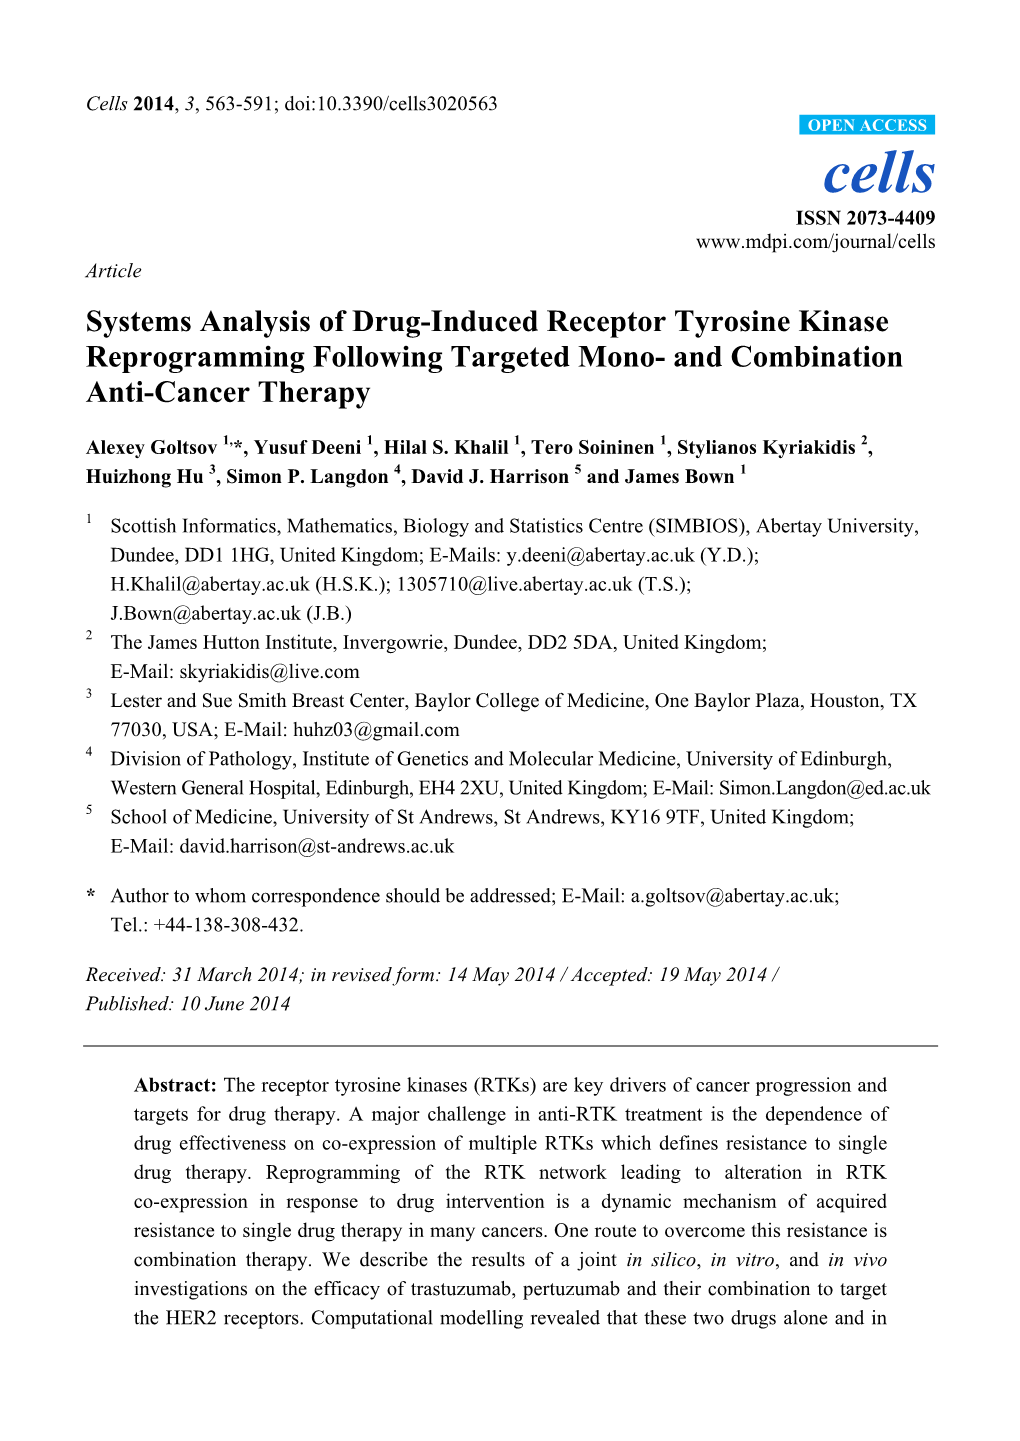 Systems Analysis of Drug-Induced Receptor Tyrosine Kinase Reprogramming Following Targeted Mono- and Combination Anti-Cancer Therapy